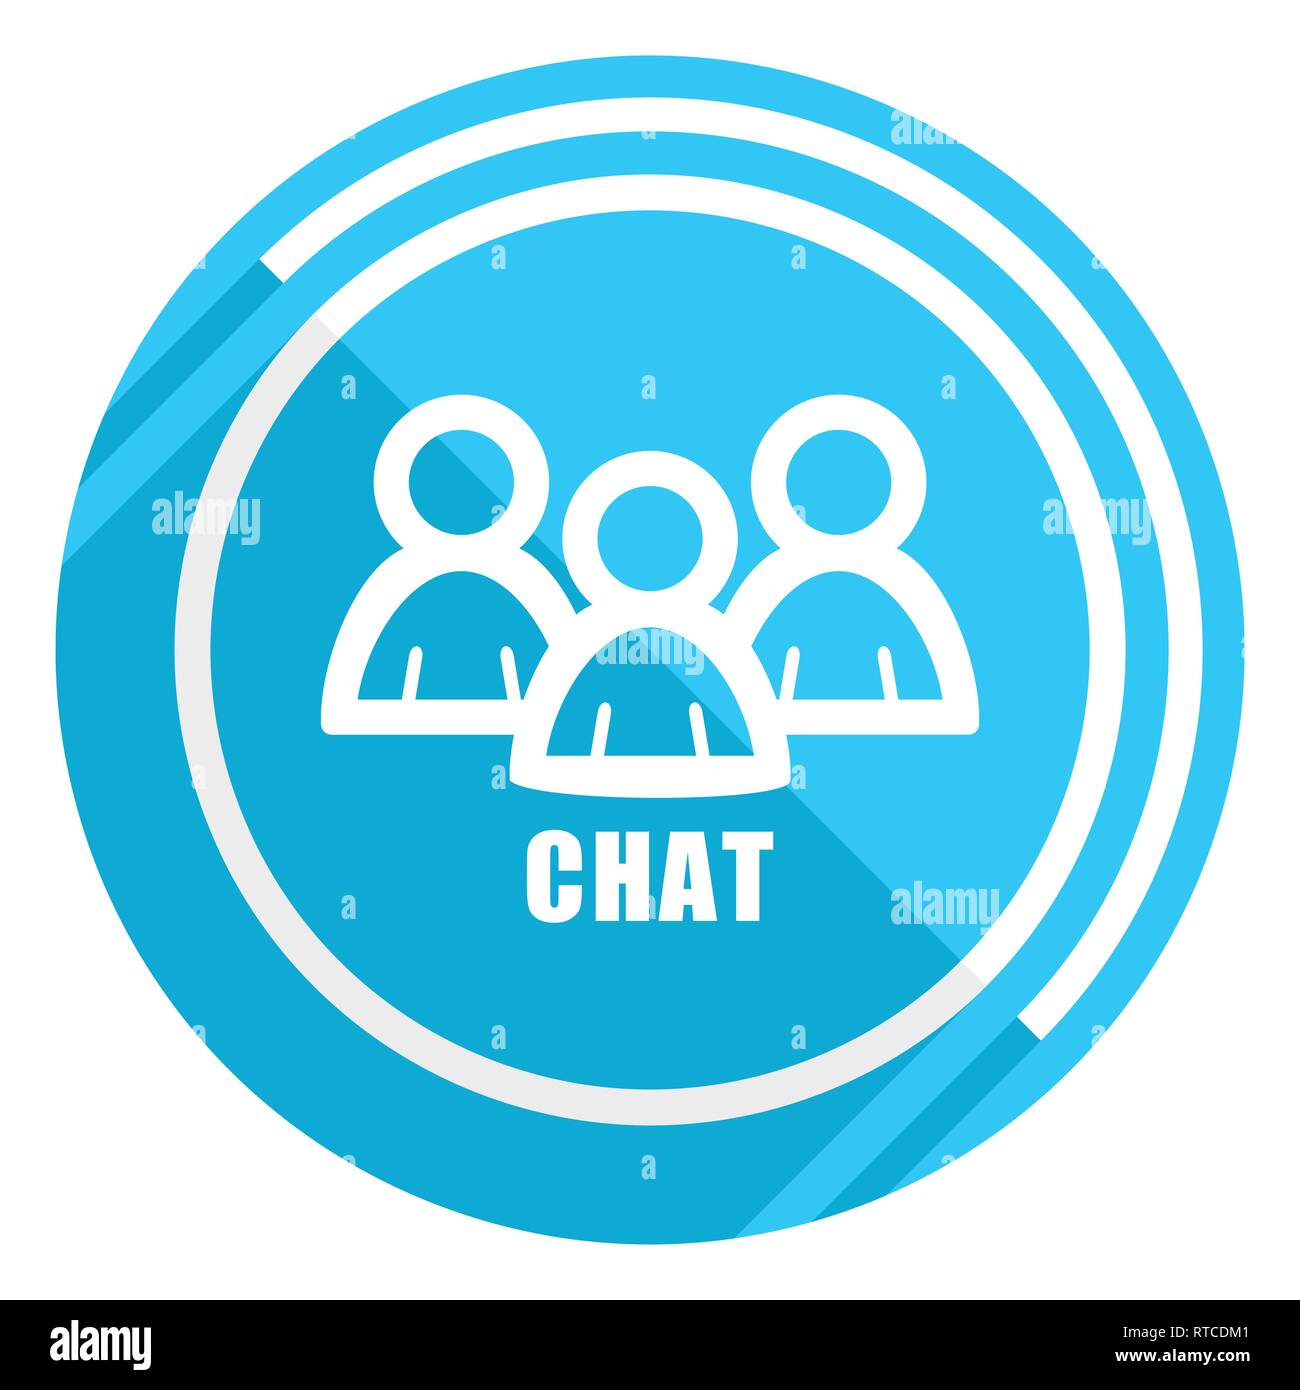 Mob chat hr